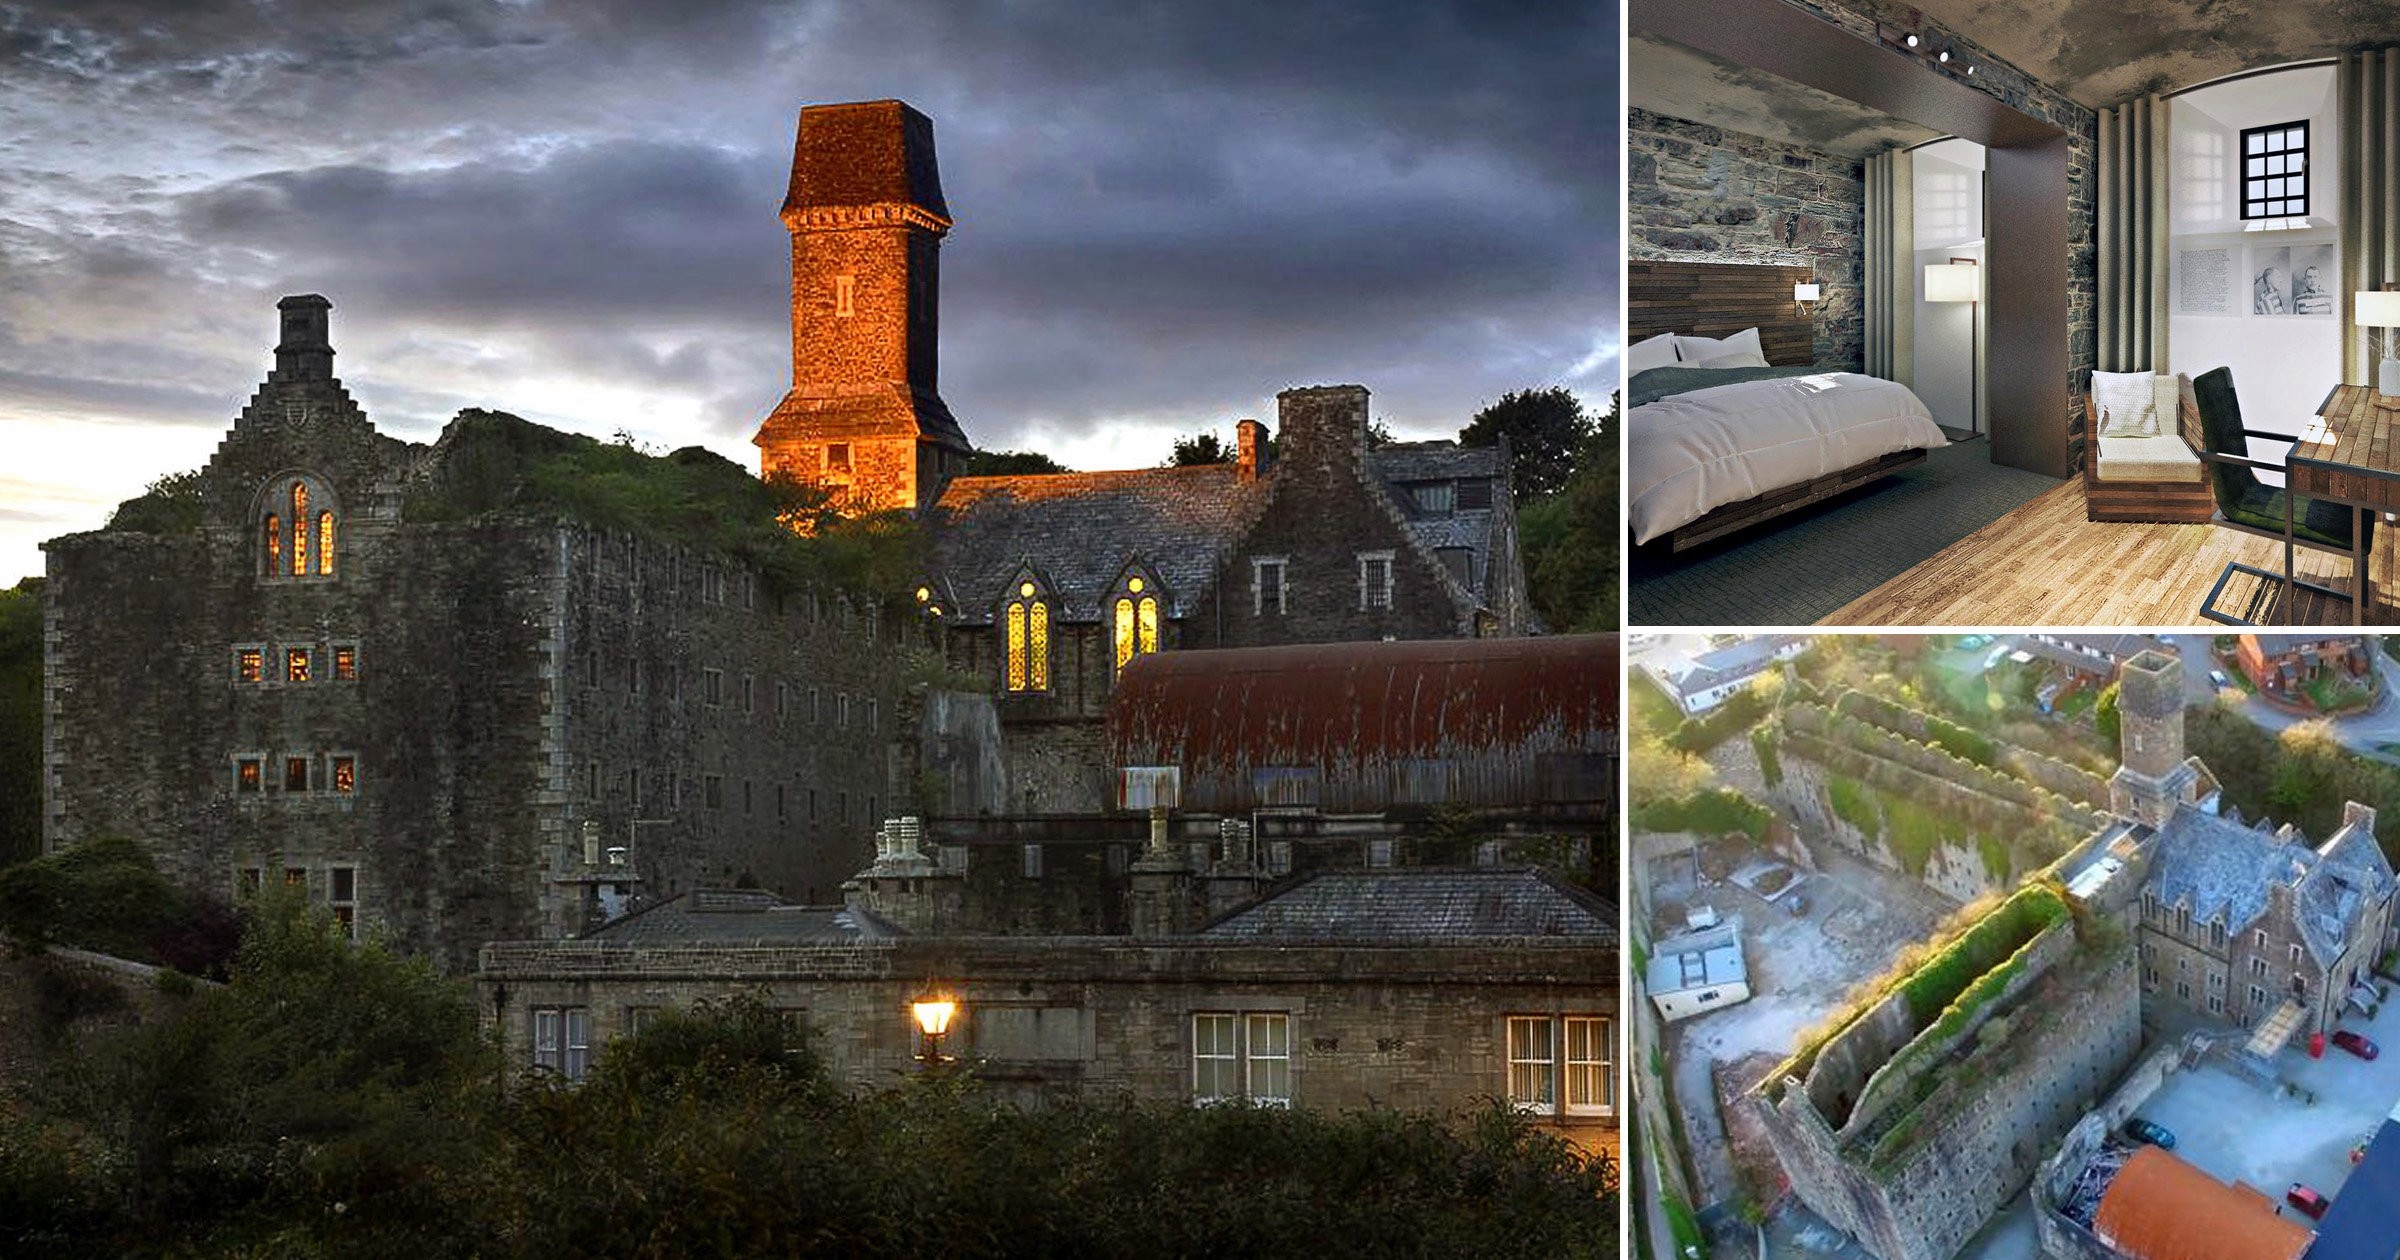 The abandoned prison was turned into an expensive hotel